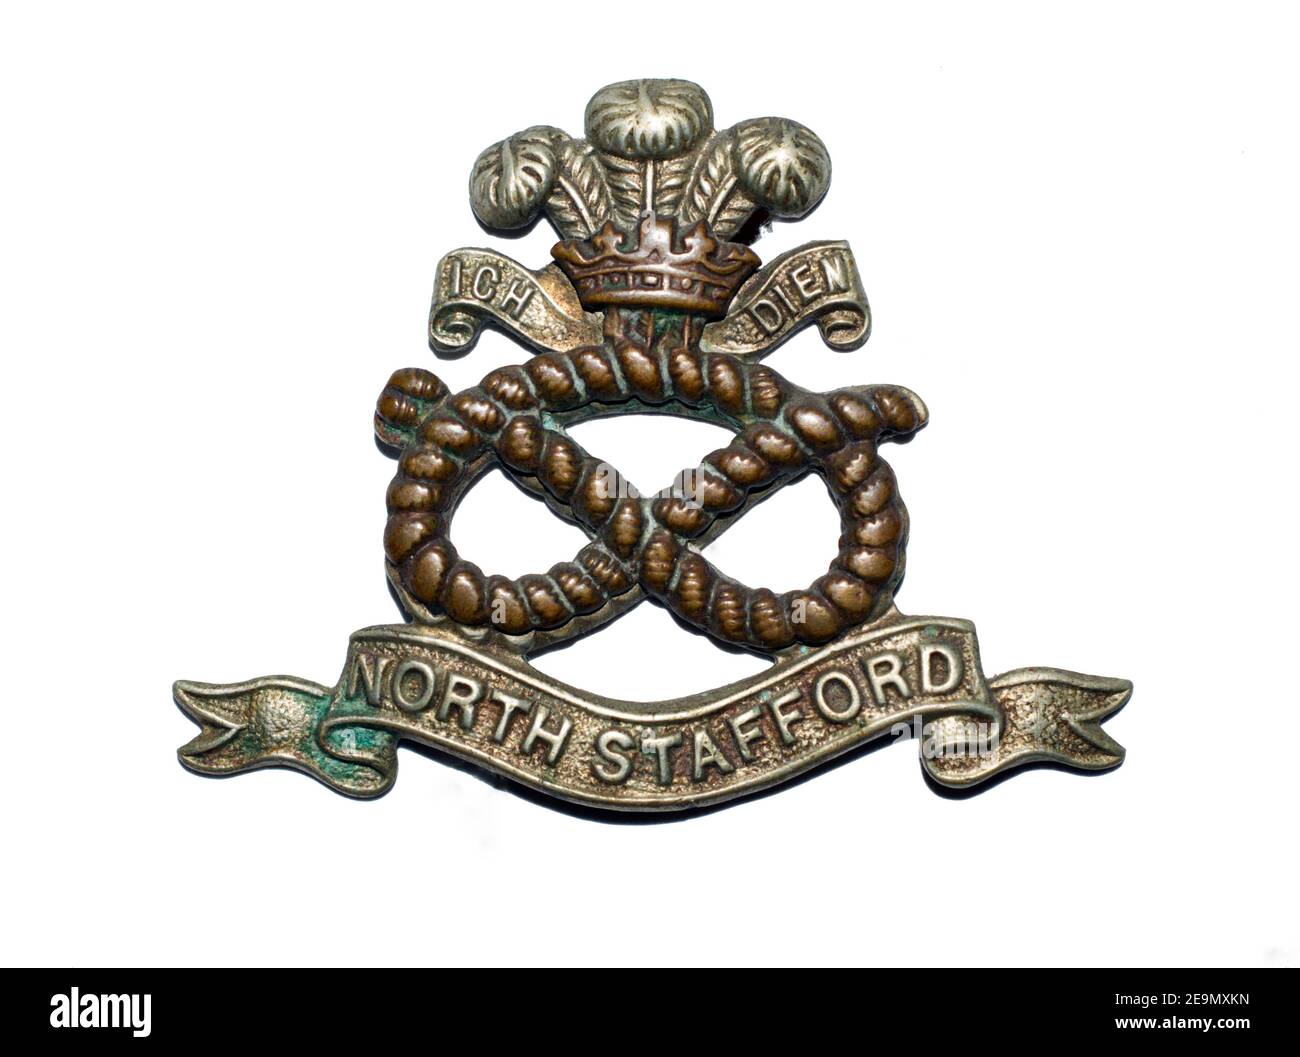 A cap badge of the North Staffordshire Regiment c. 1900-1959. Stock Photo